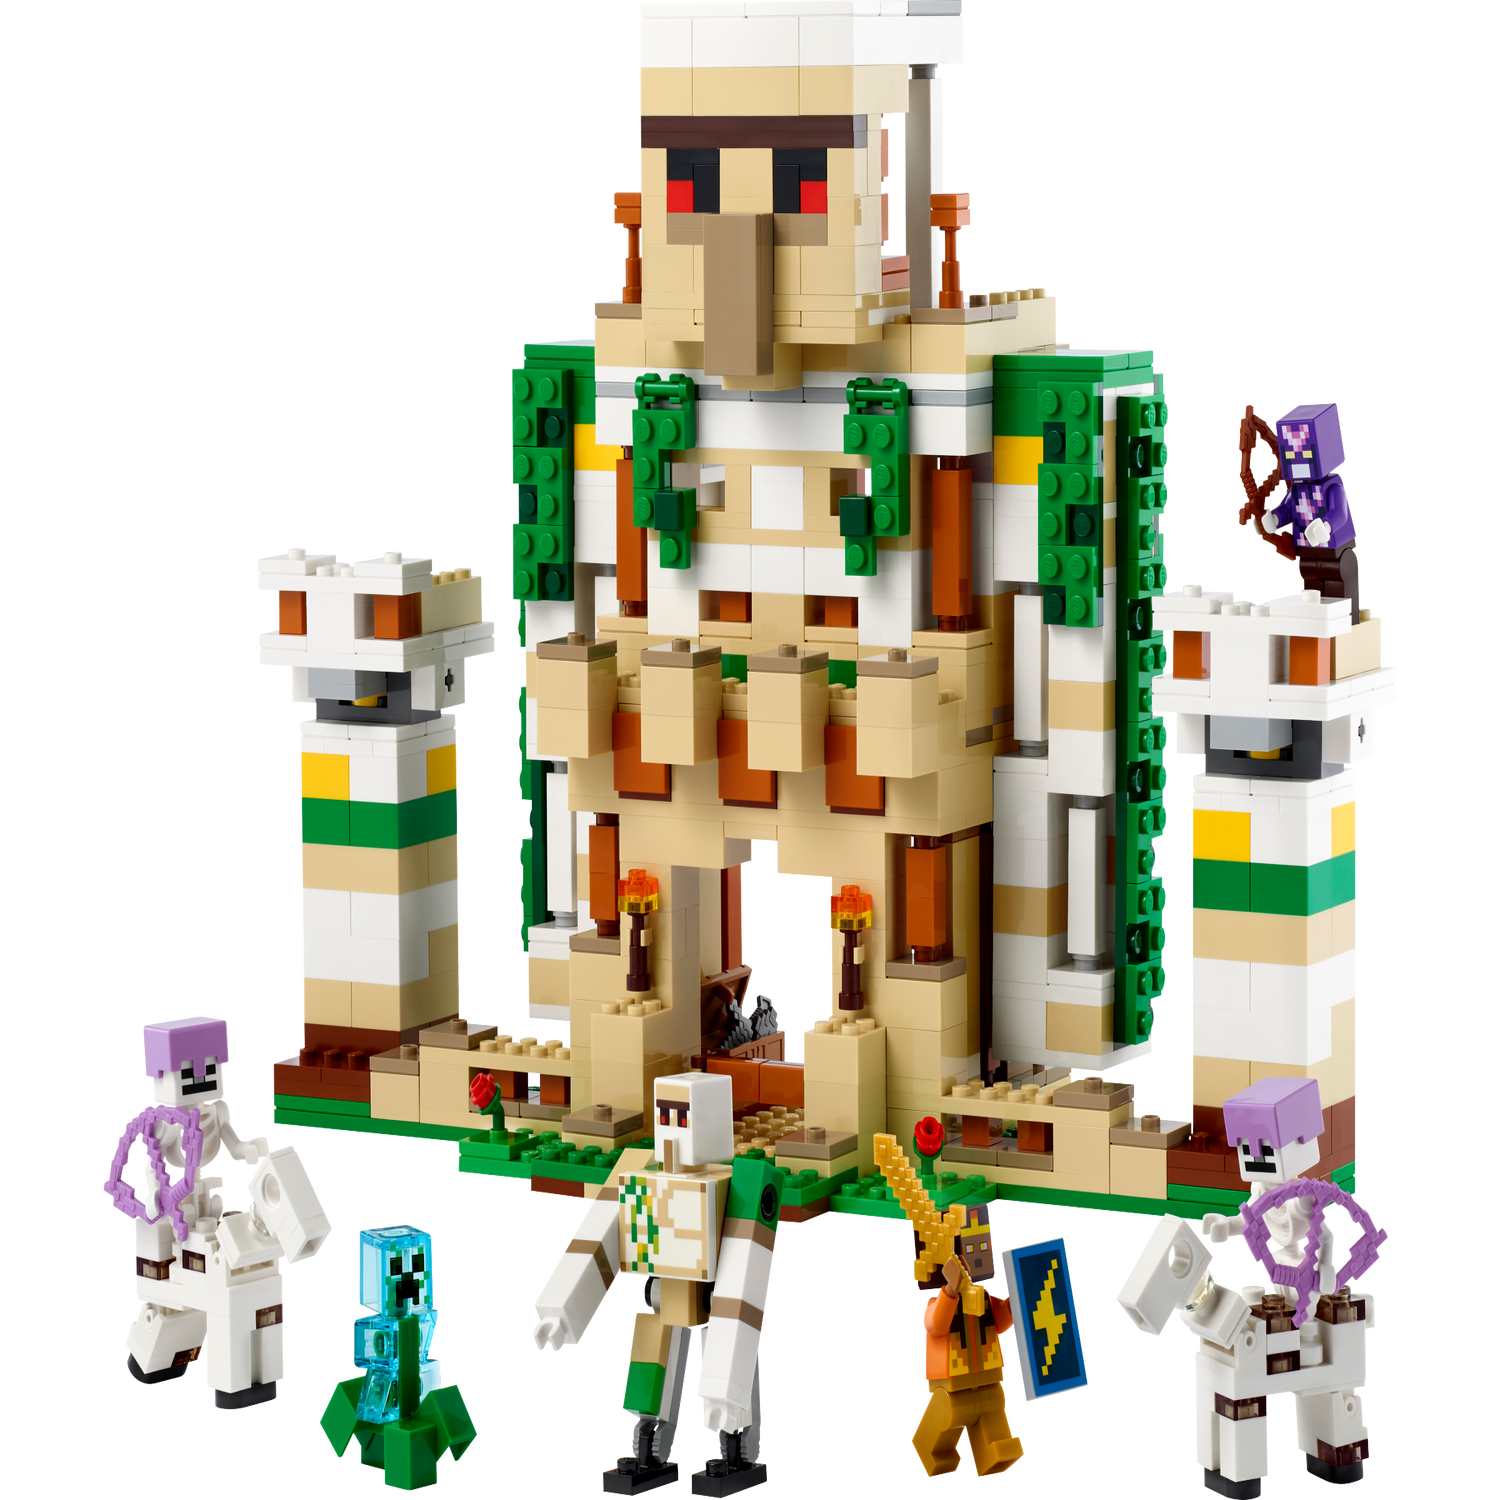 Build Together 11020 | Classic | Buy online at the Official LEGO® Shop US